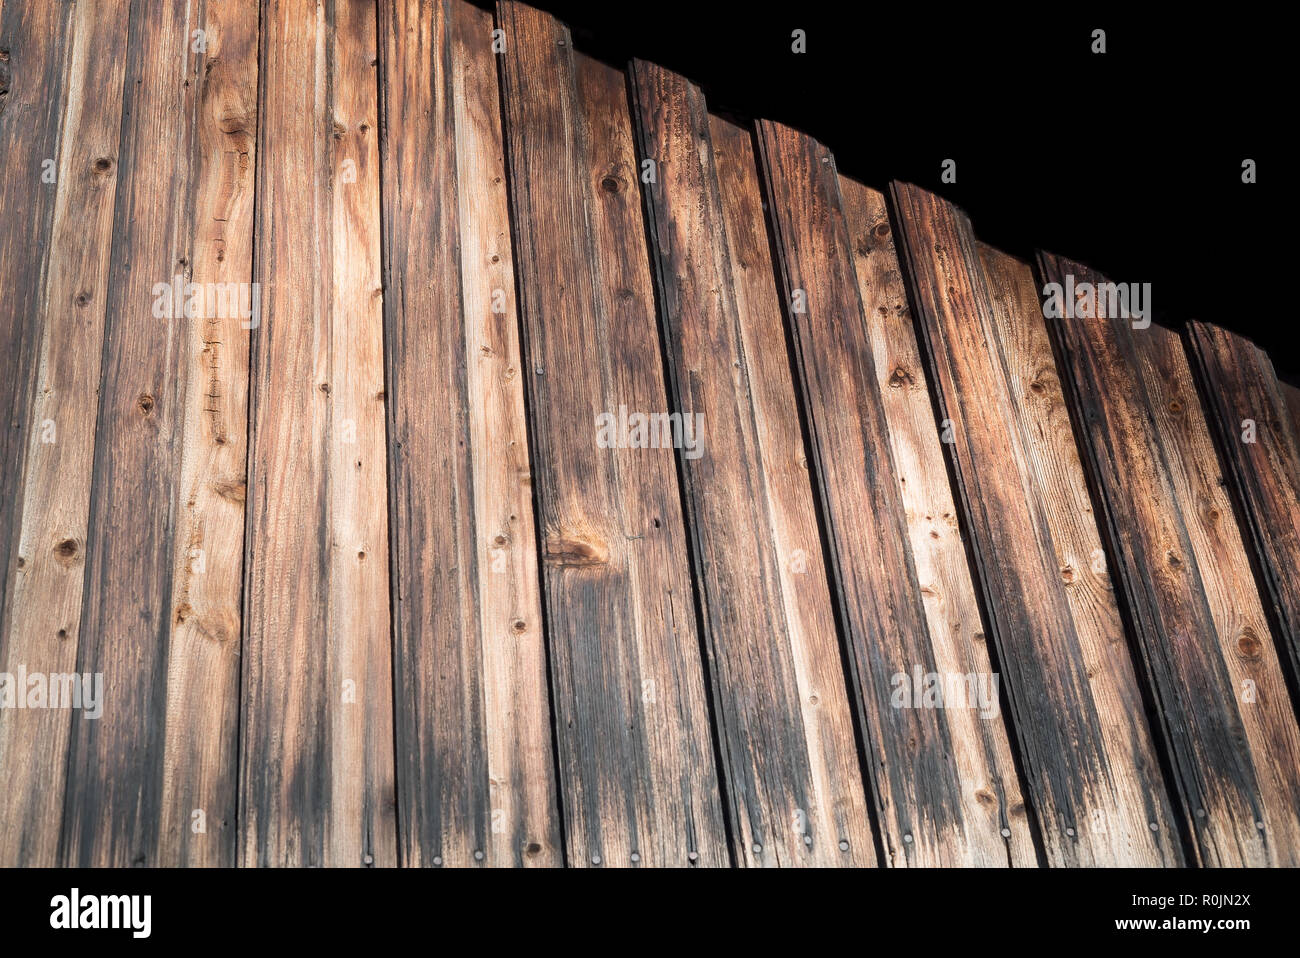 Weathered rustic wood wall with old antique varnish on the rough, vintage surface - Tall rural blockade - Aged wooden background. Stock Photo